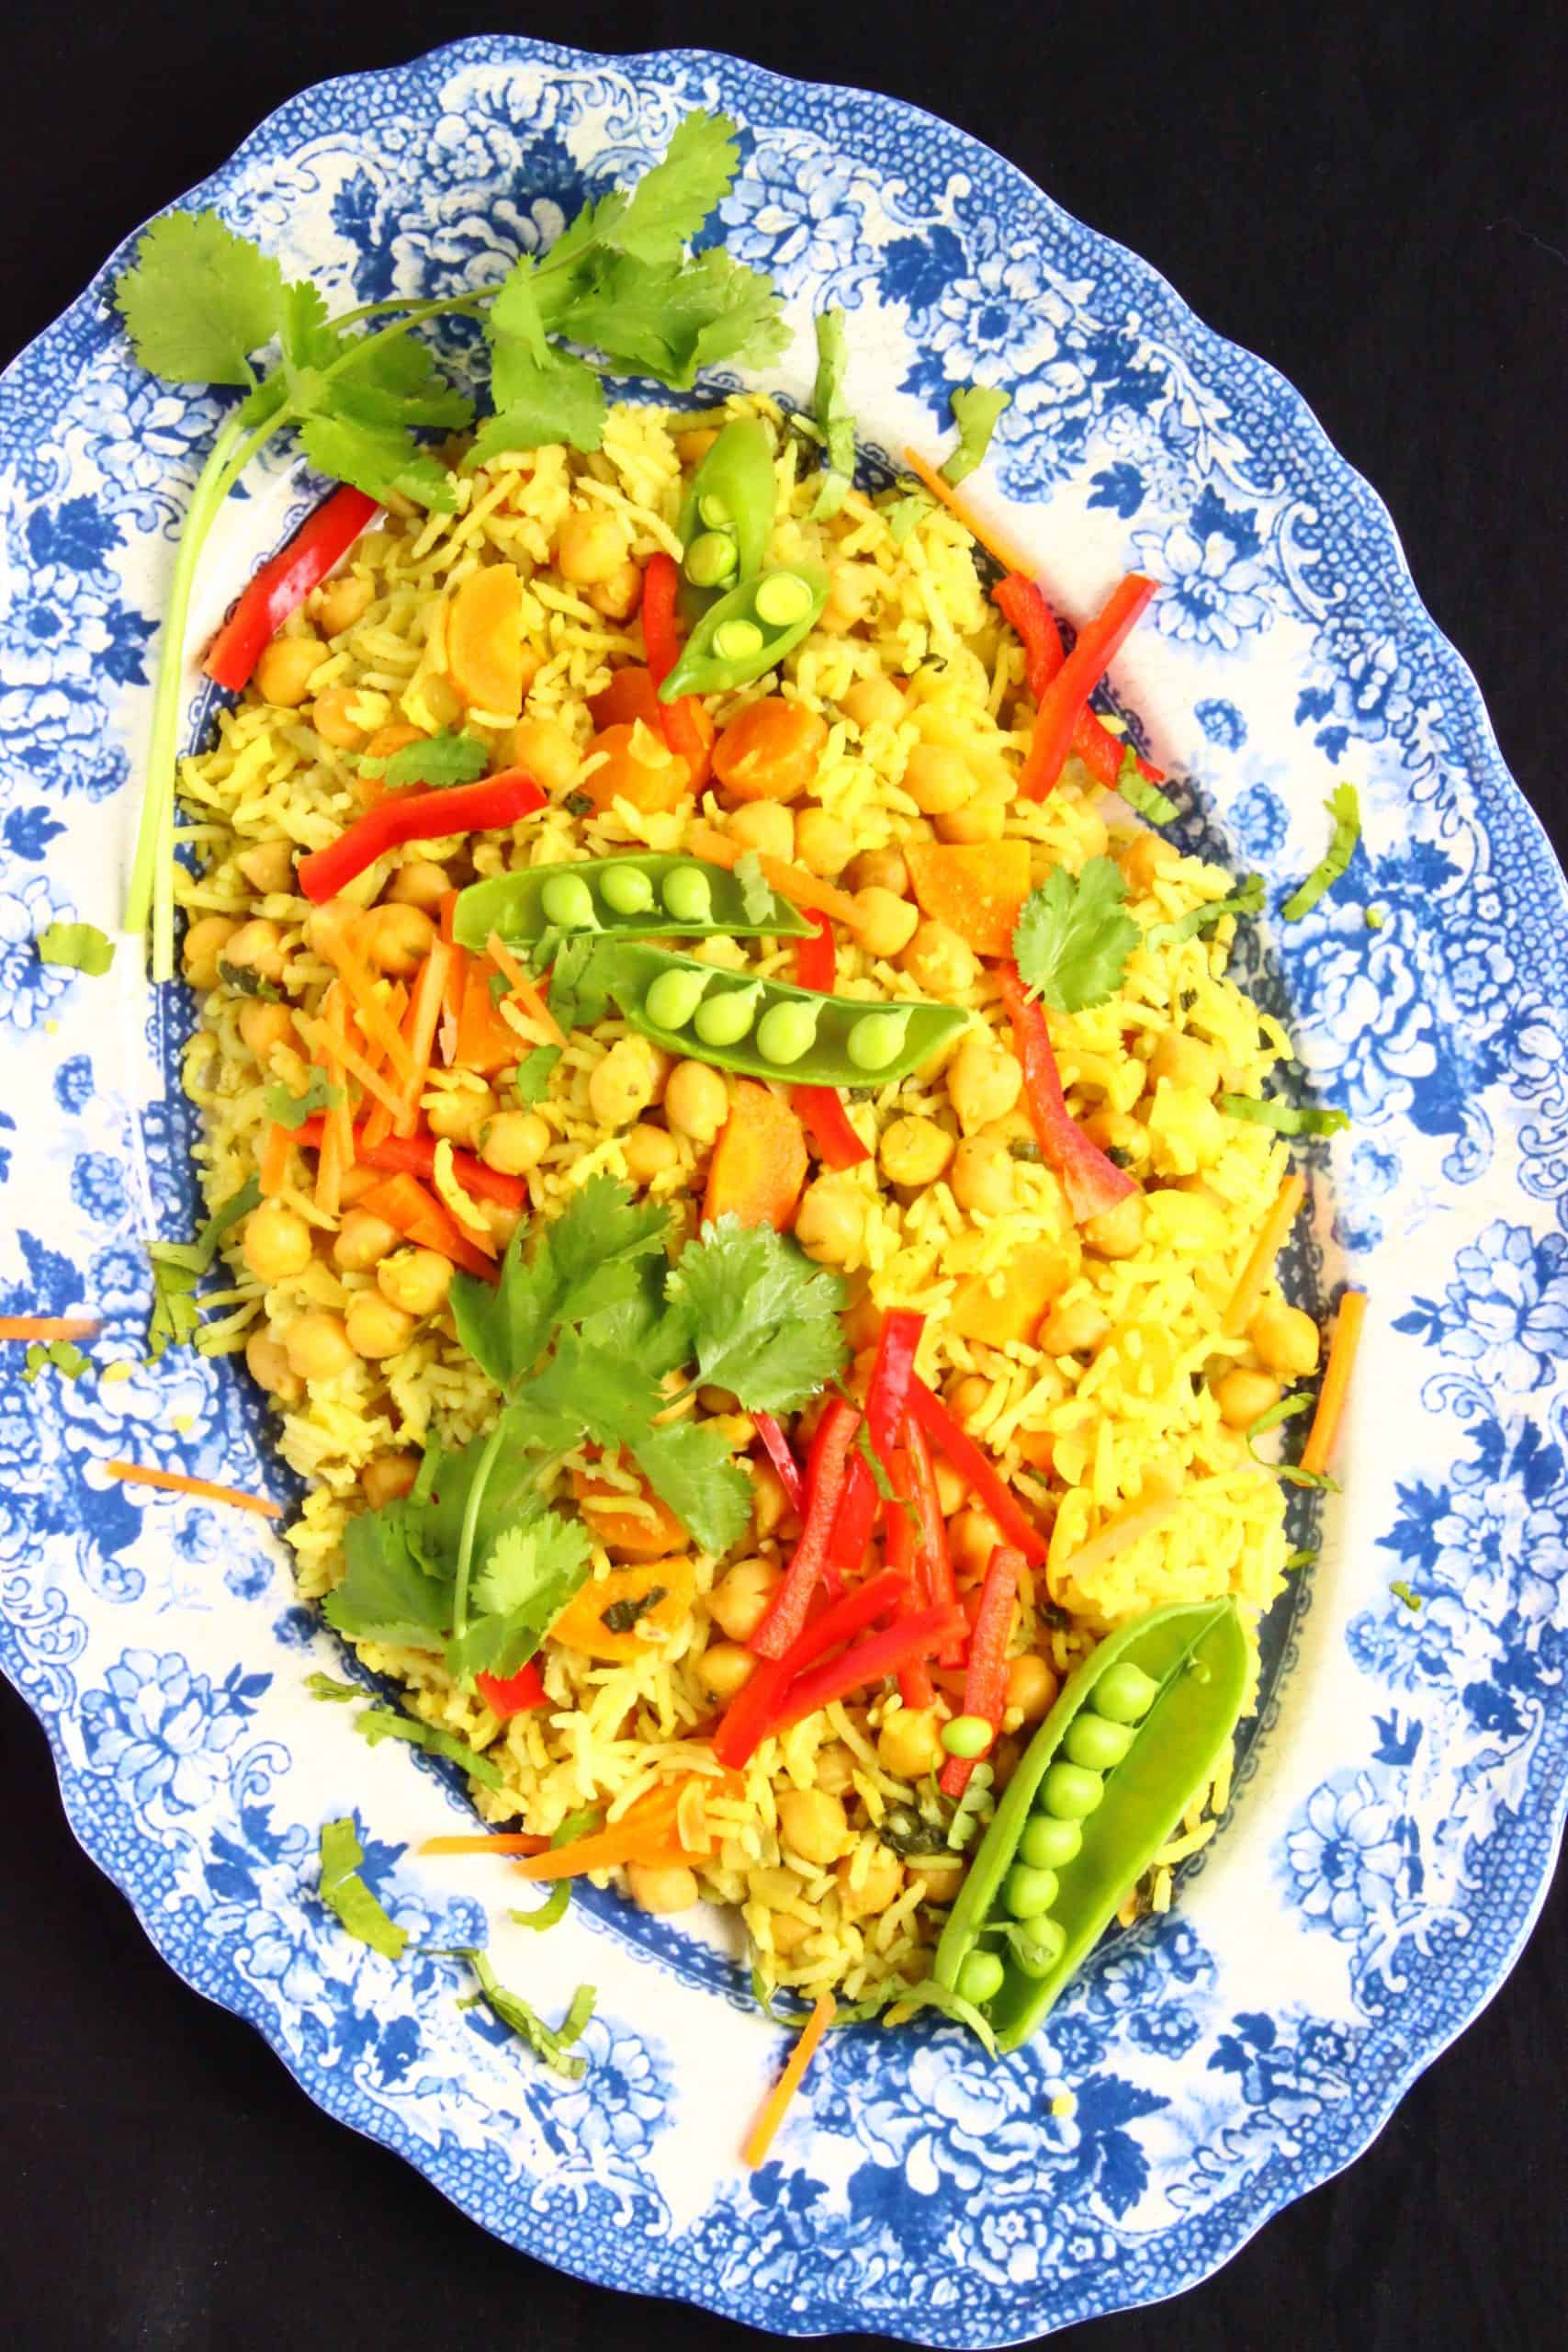 Chickpea kedgeree with rice and vegetables on a blue plate